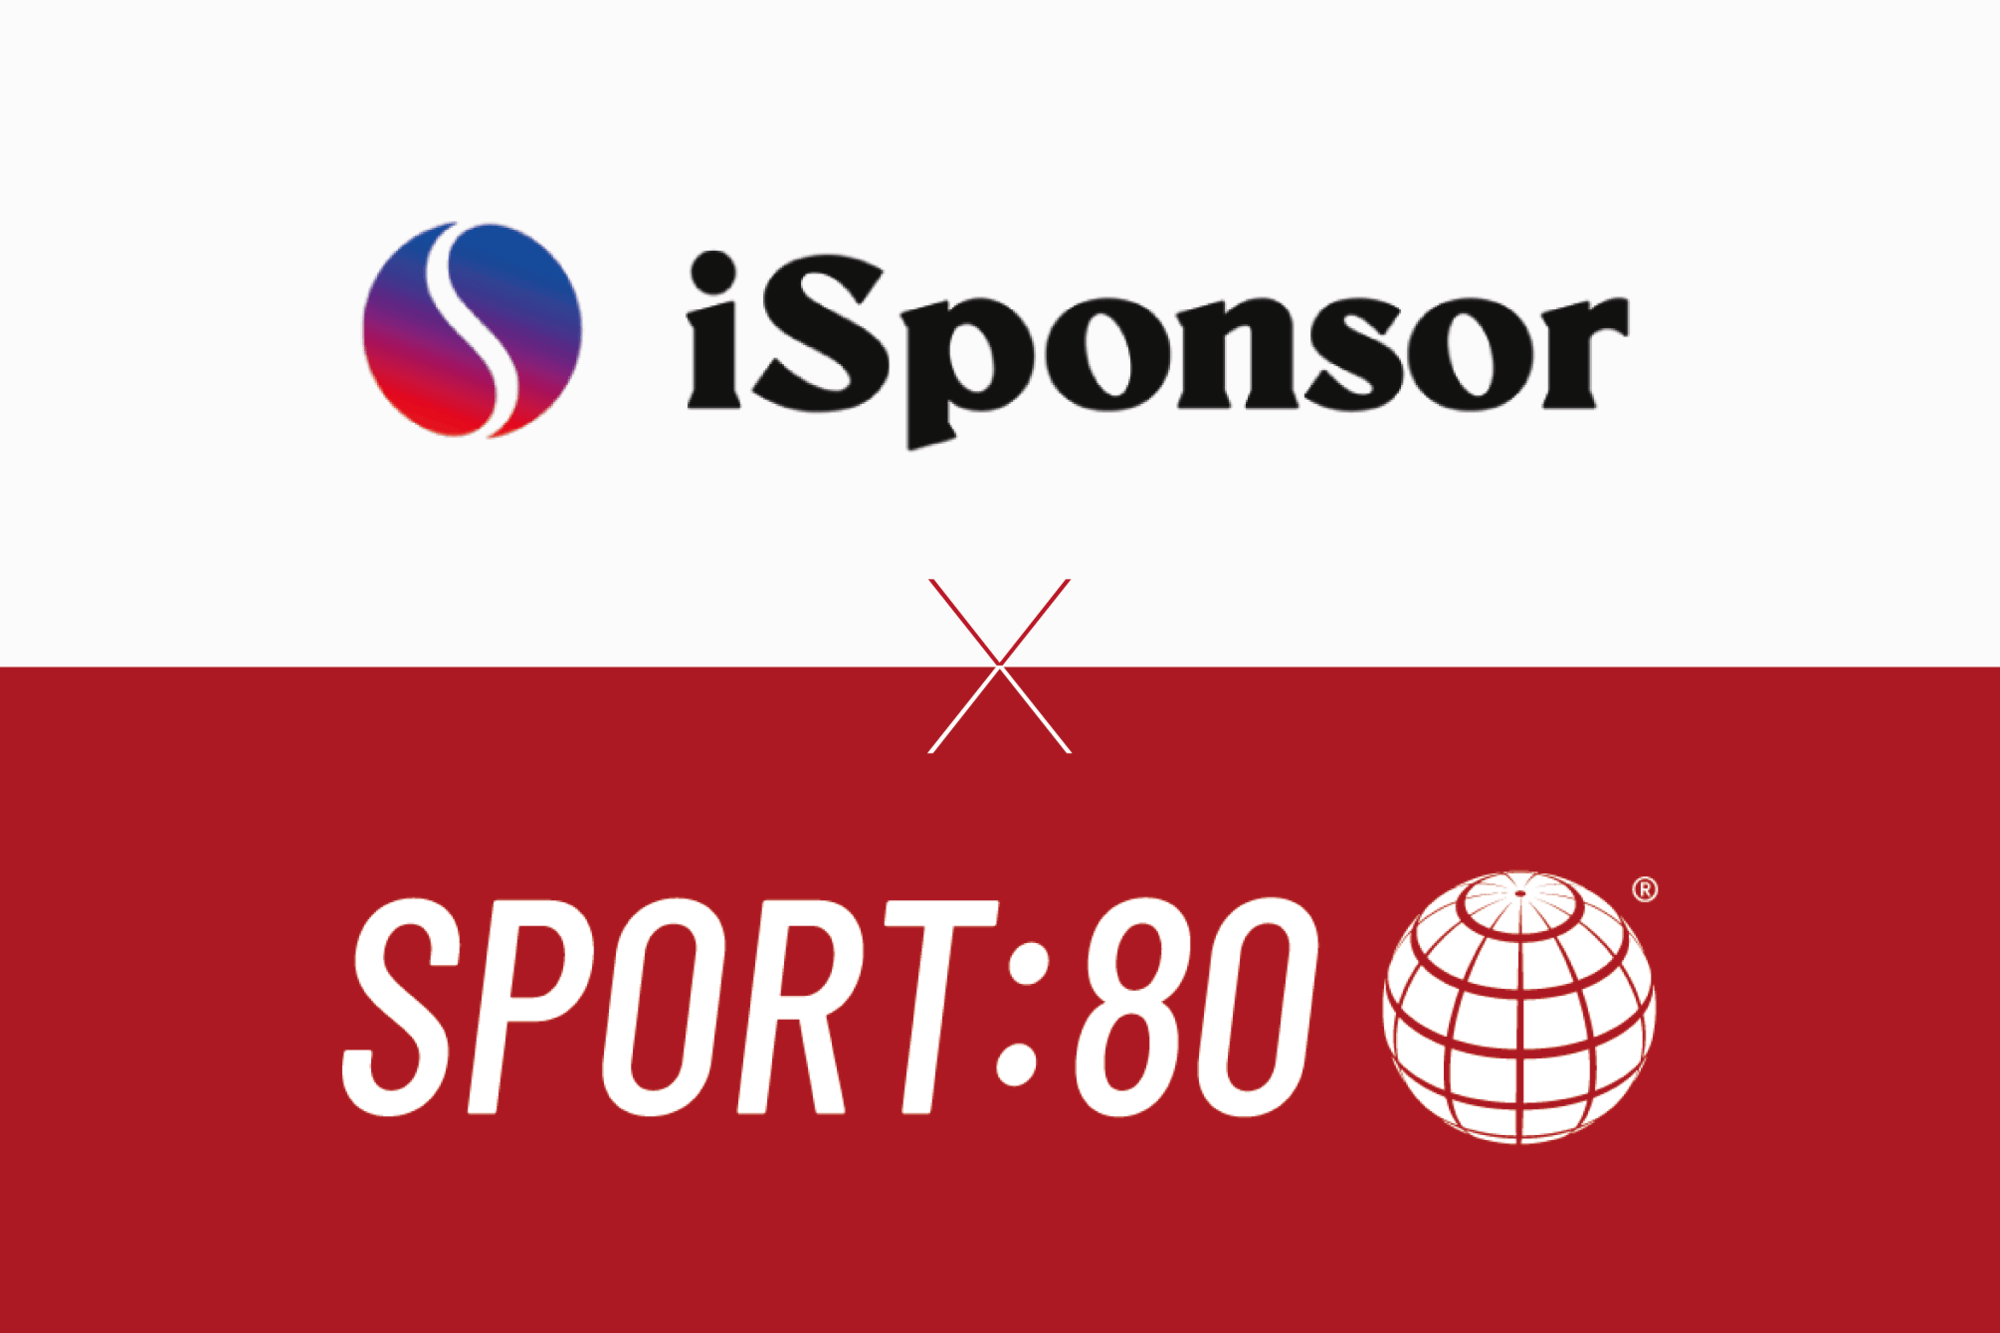 How sports clubs and NGBs can smash fundraising targets through Sport:80 and iSponsor partnership